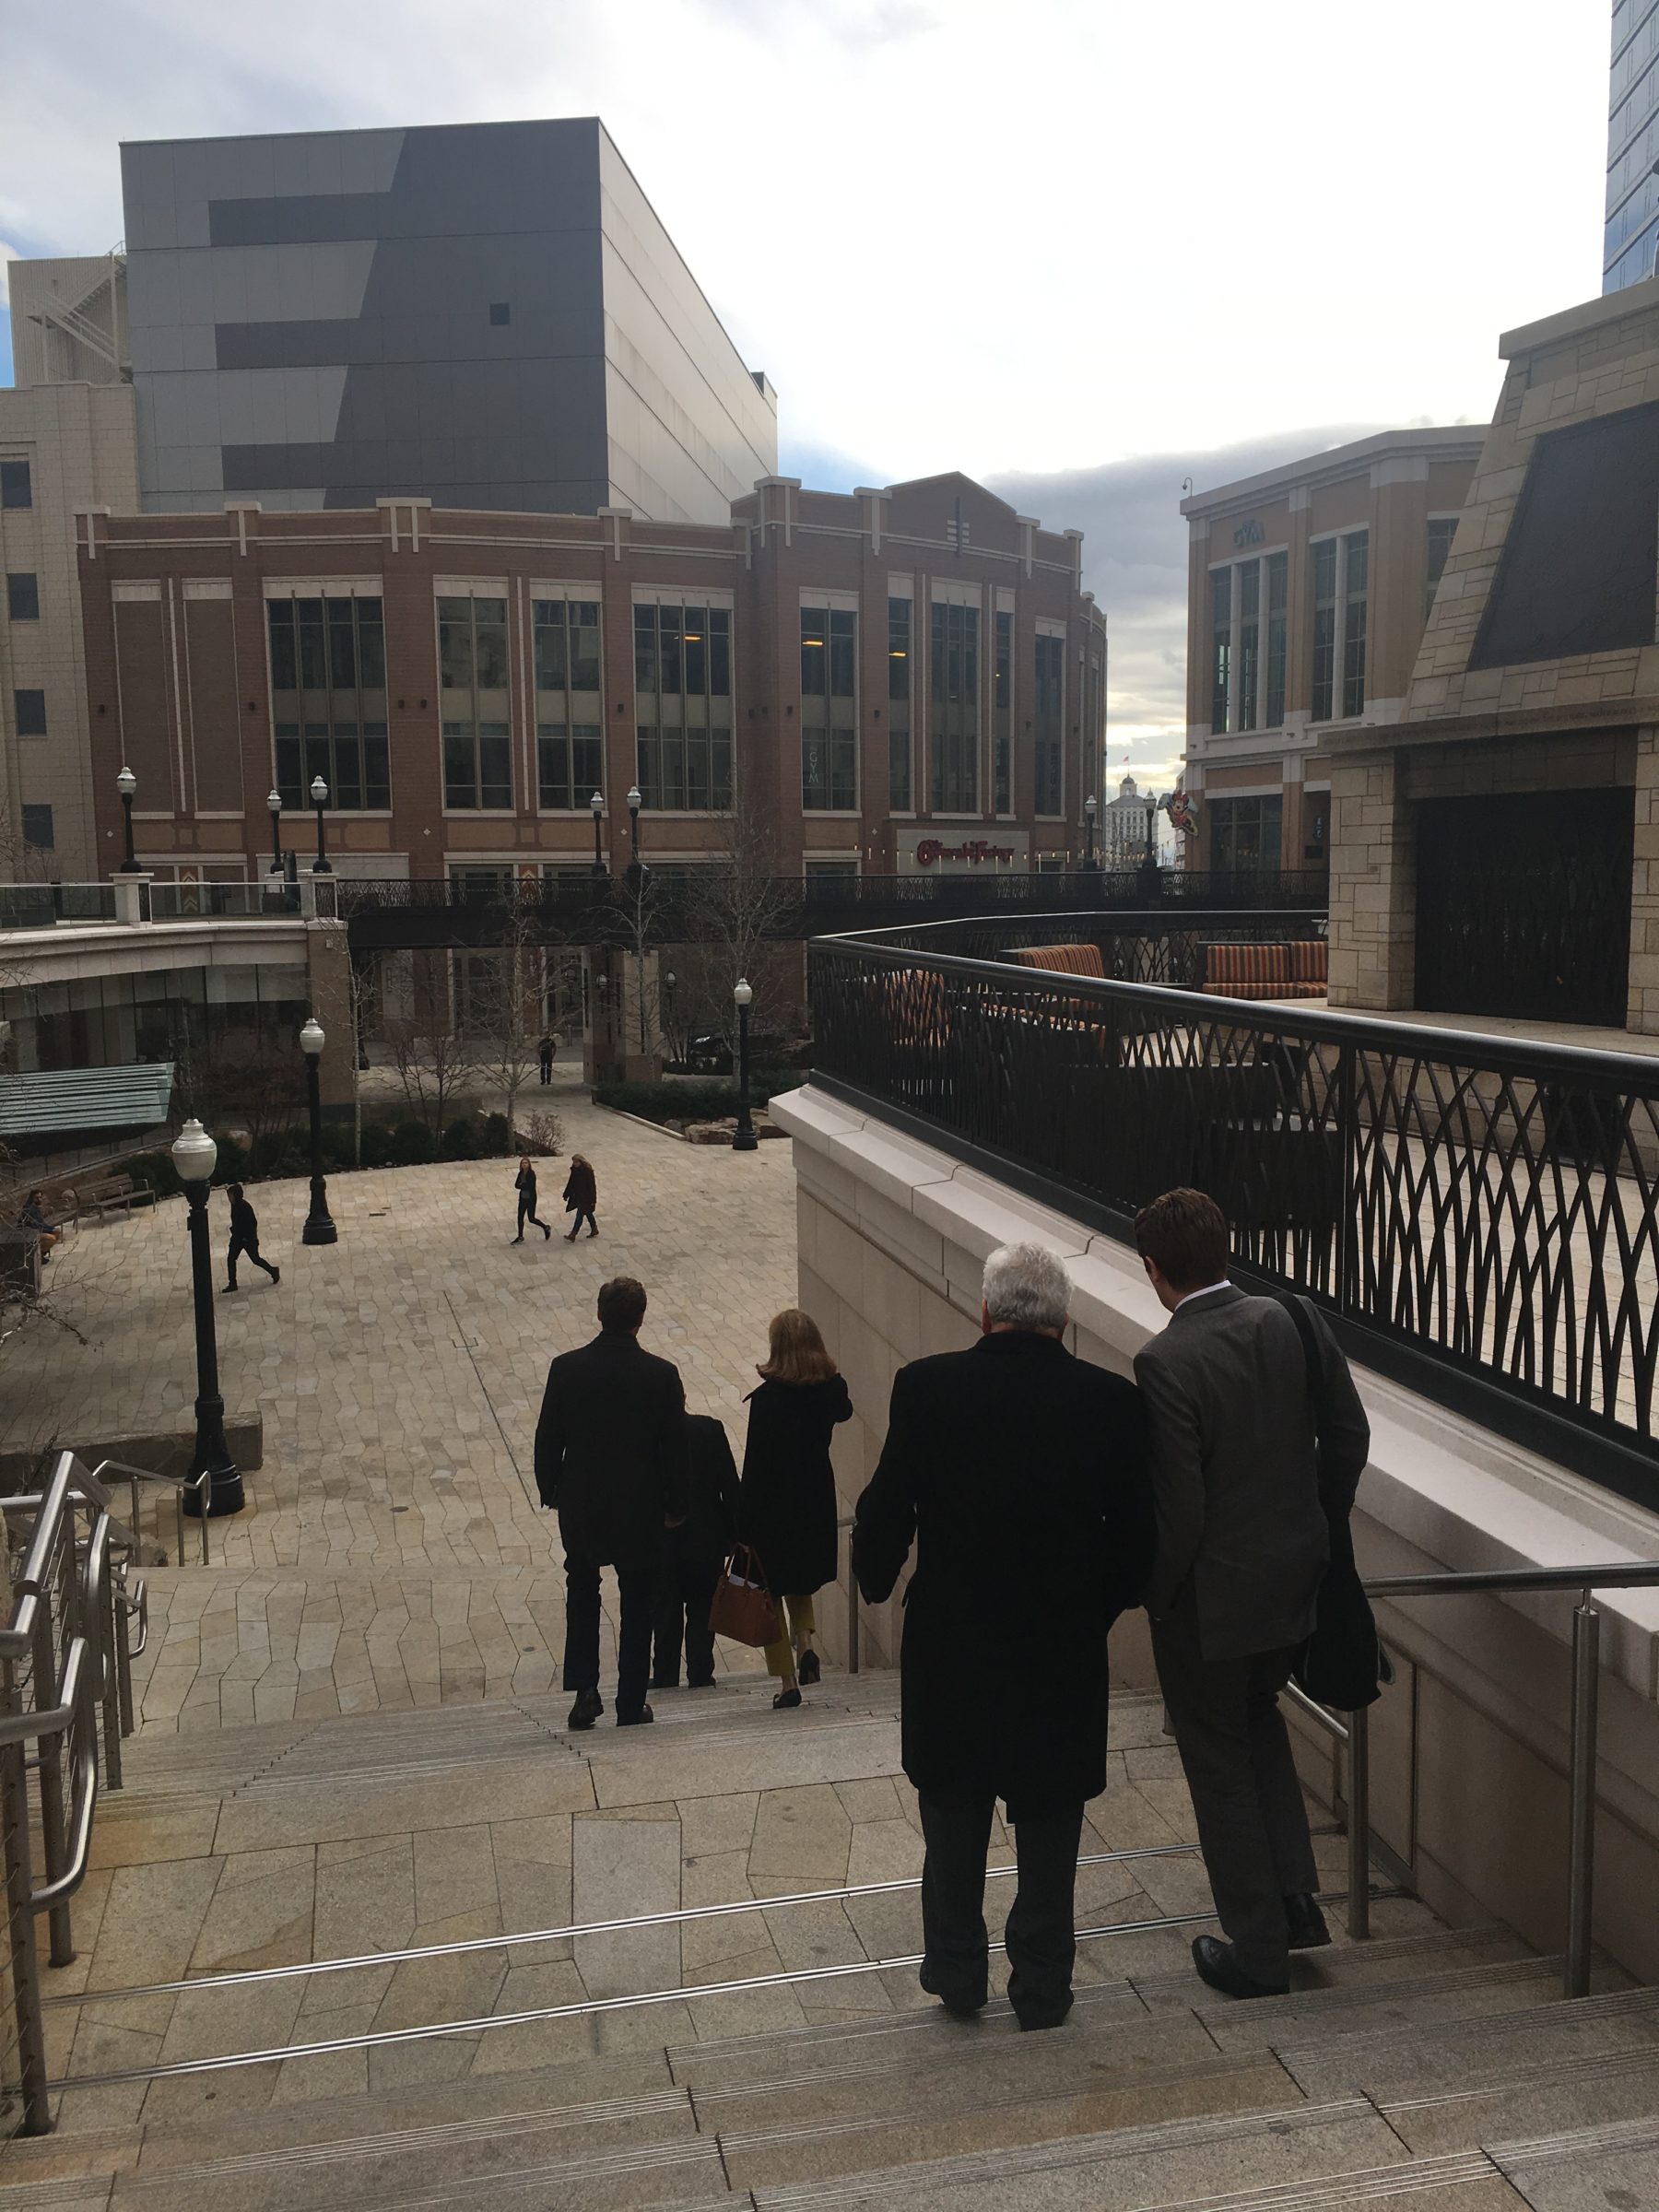 The team strolls through City Creek on our way to the next meeting 